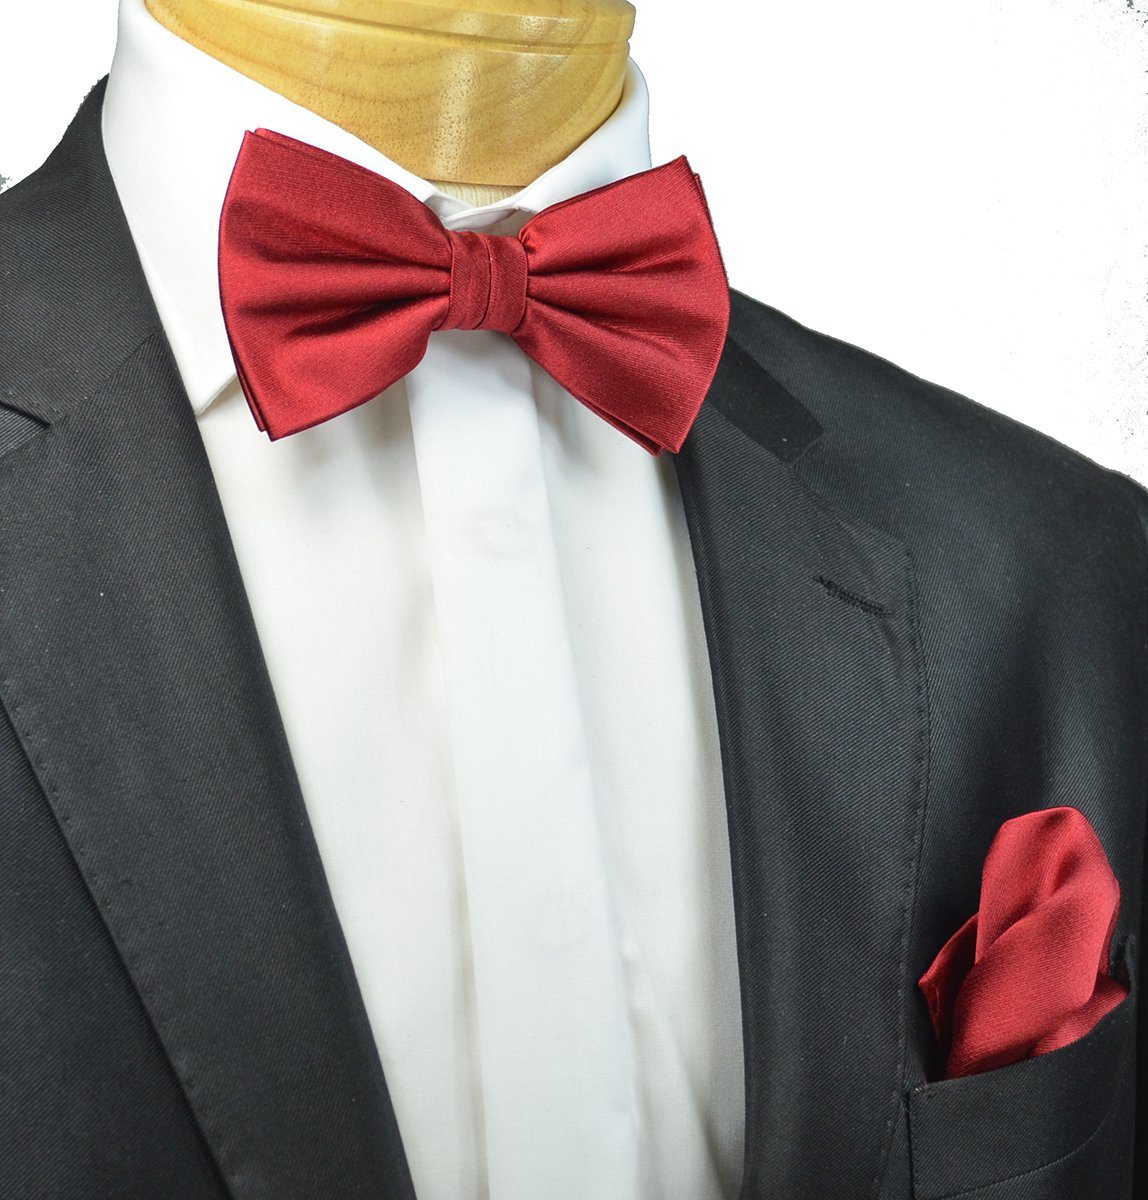 Scarlet Red Bow Tie, Red Men's Bow tie